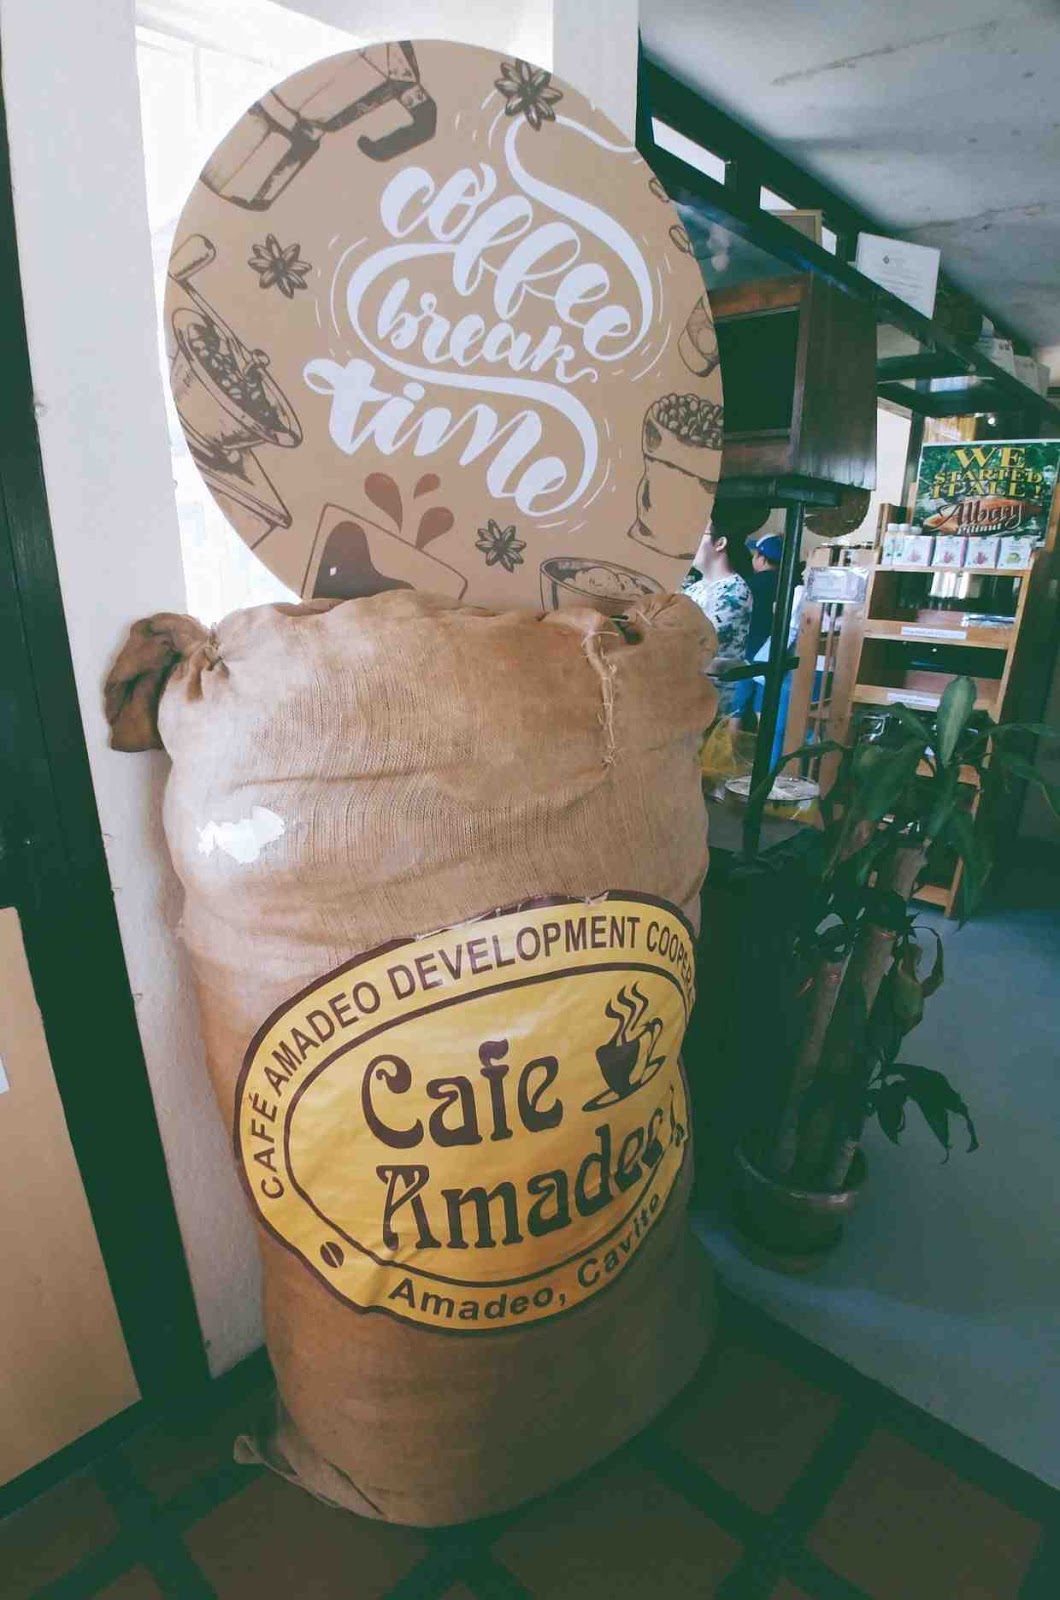 giant sack of coffee beans at Cafe Amadeo